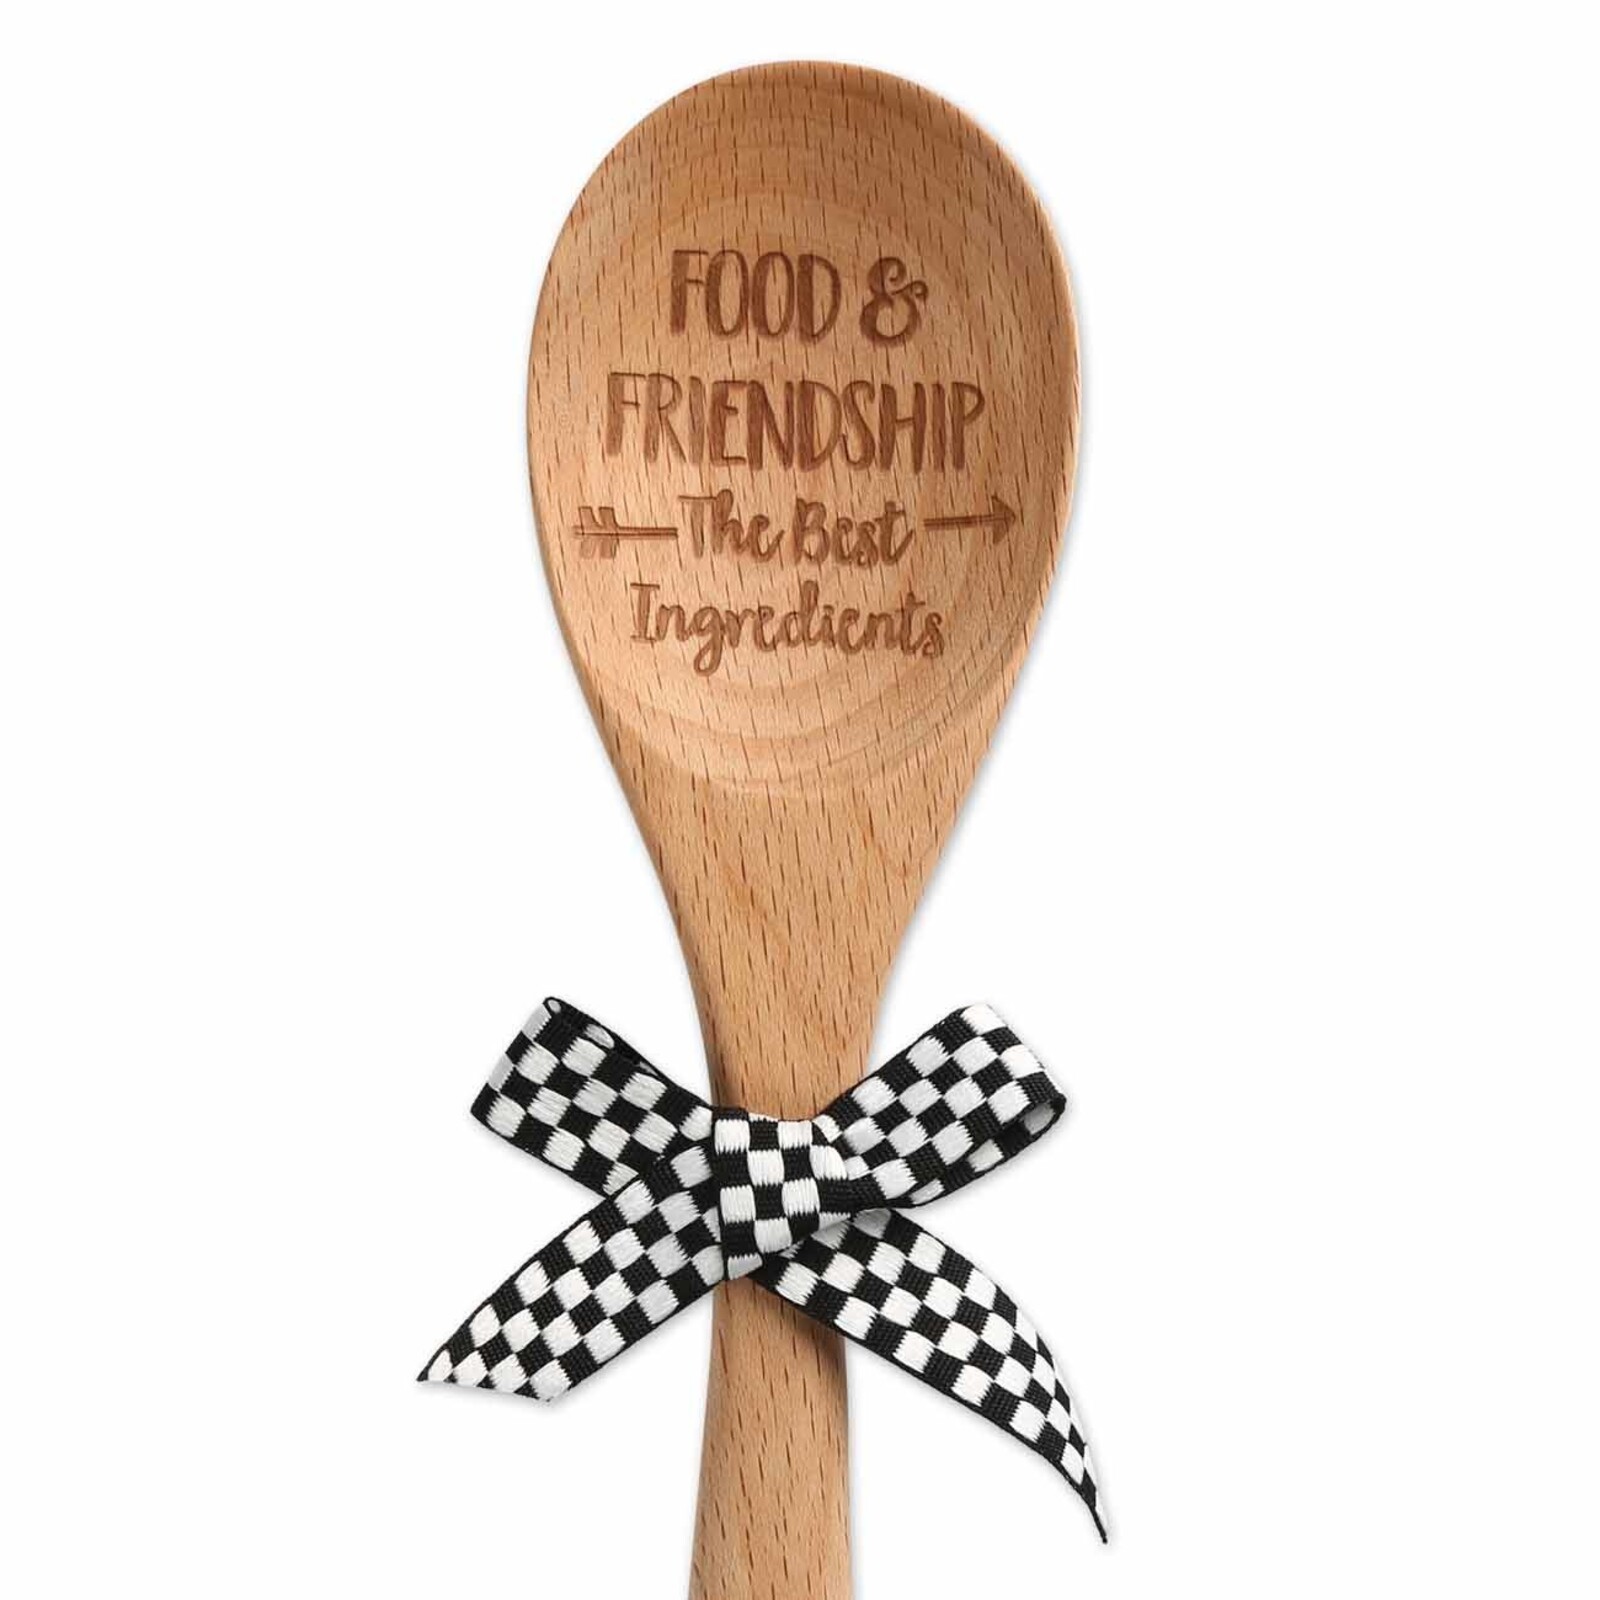 Brownlow Gifts Red and Black Sentiment Spoon loading=